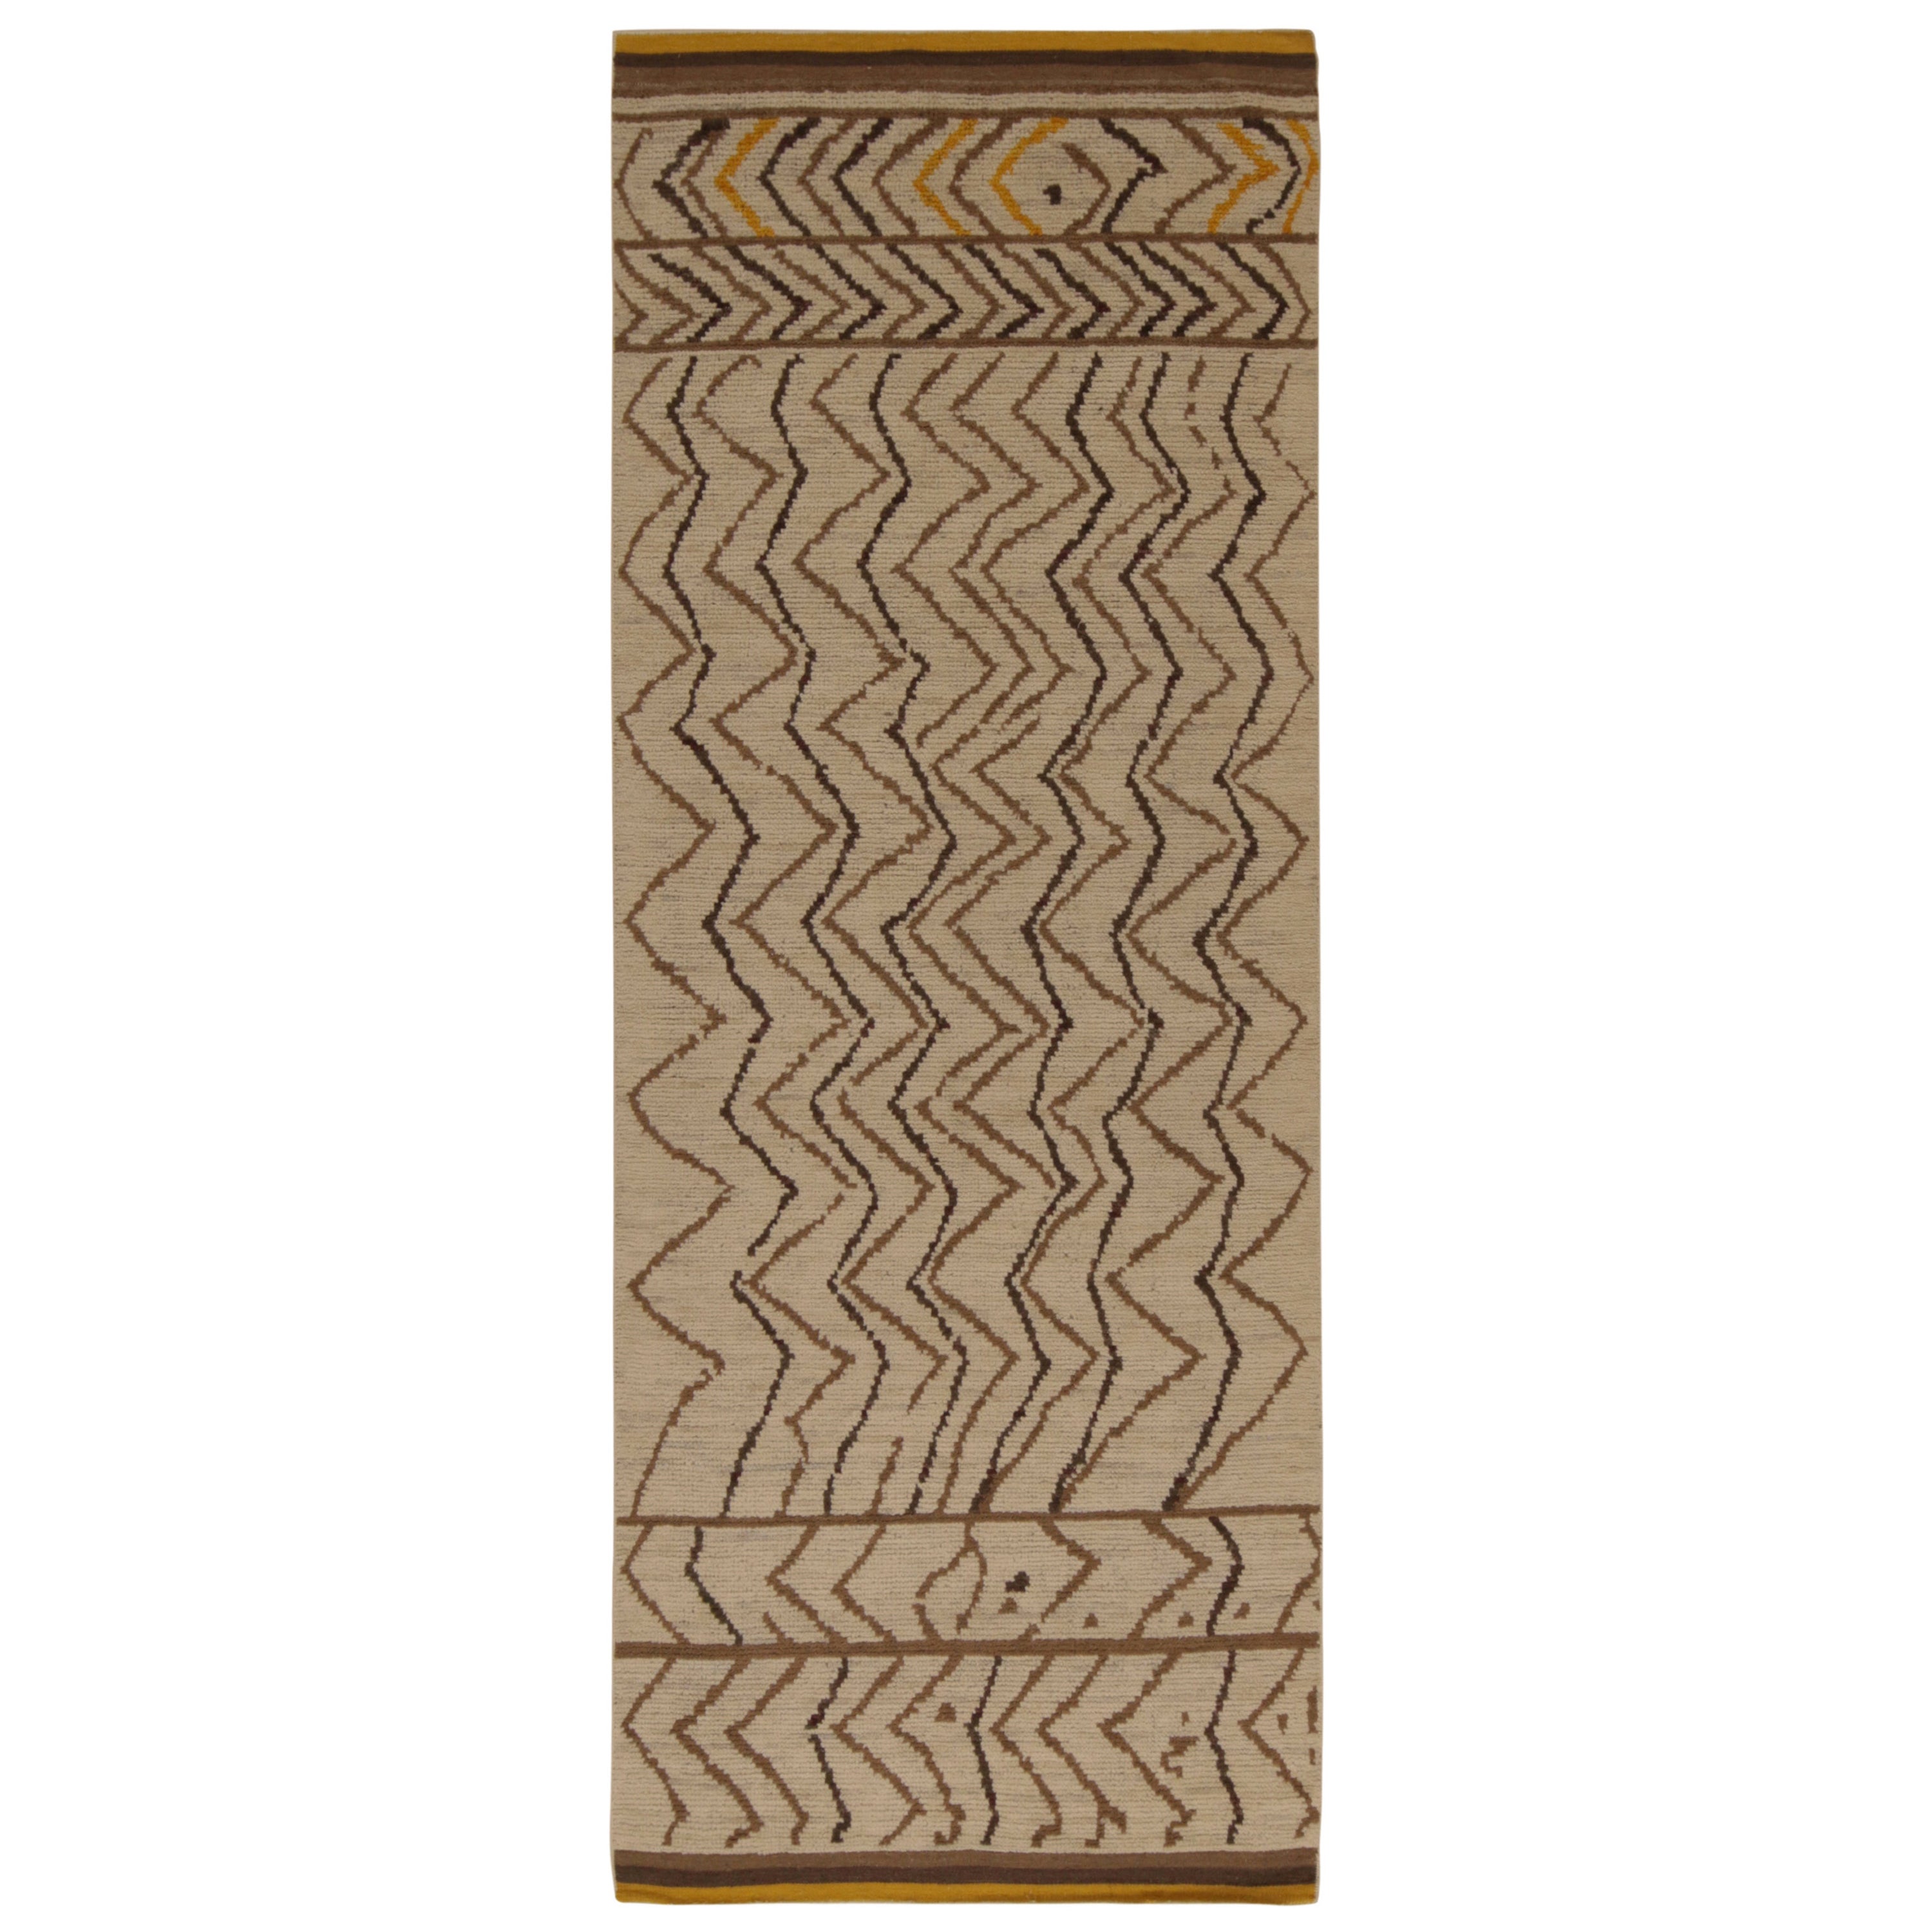 Rug & Kilim’s Moroccan Style Rug in Beige-Brown Chevrons with Gold Accents For Sale